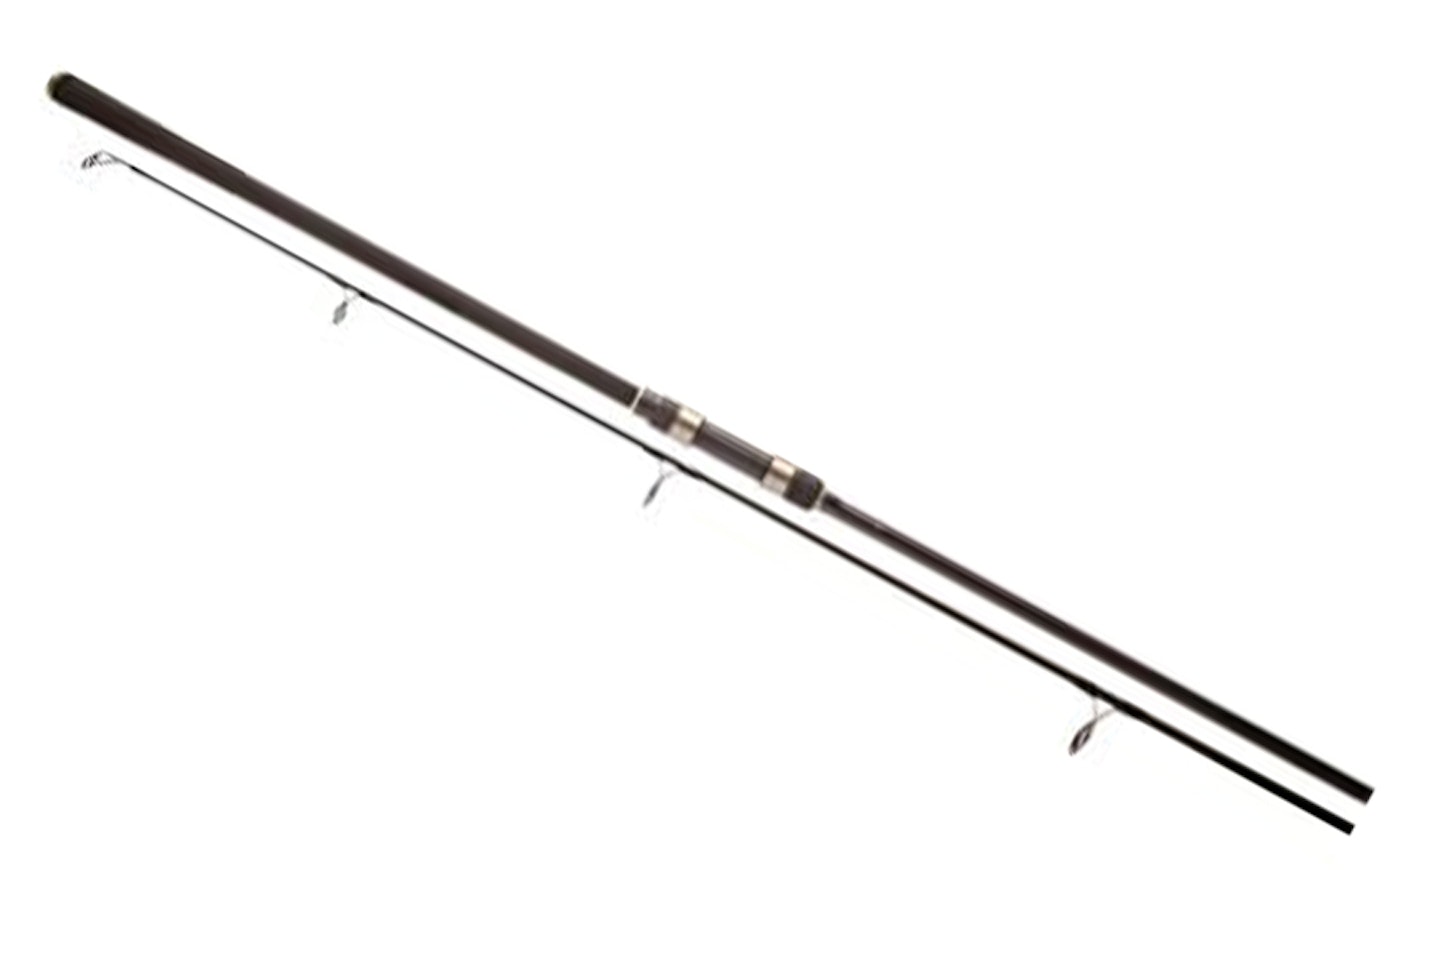 Top and budget carp rods for long distance casting